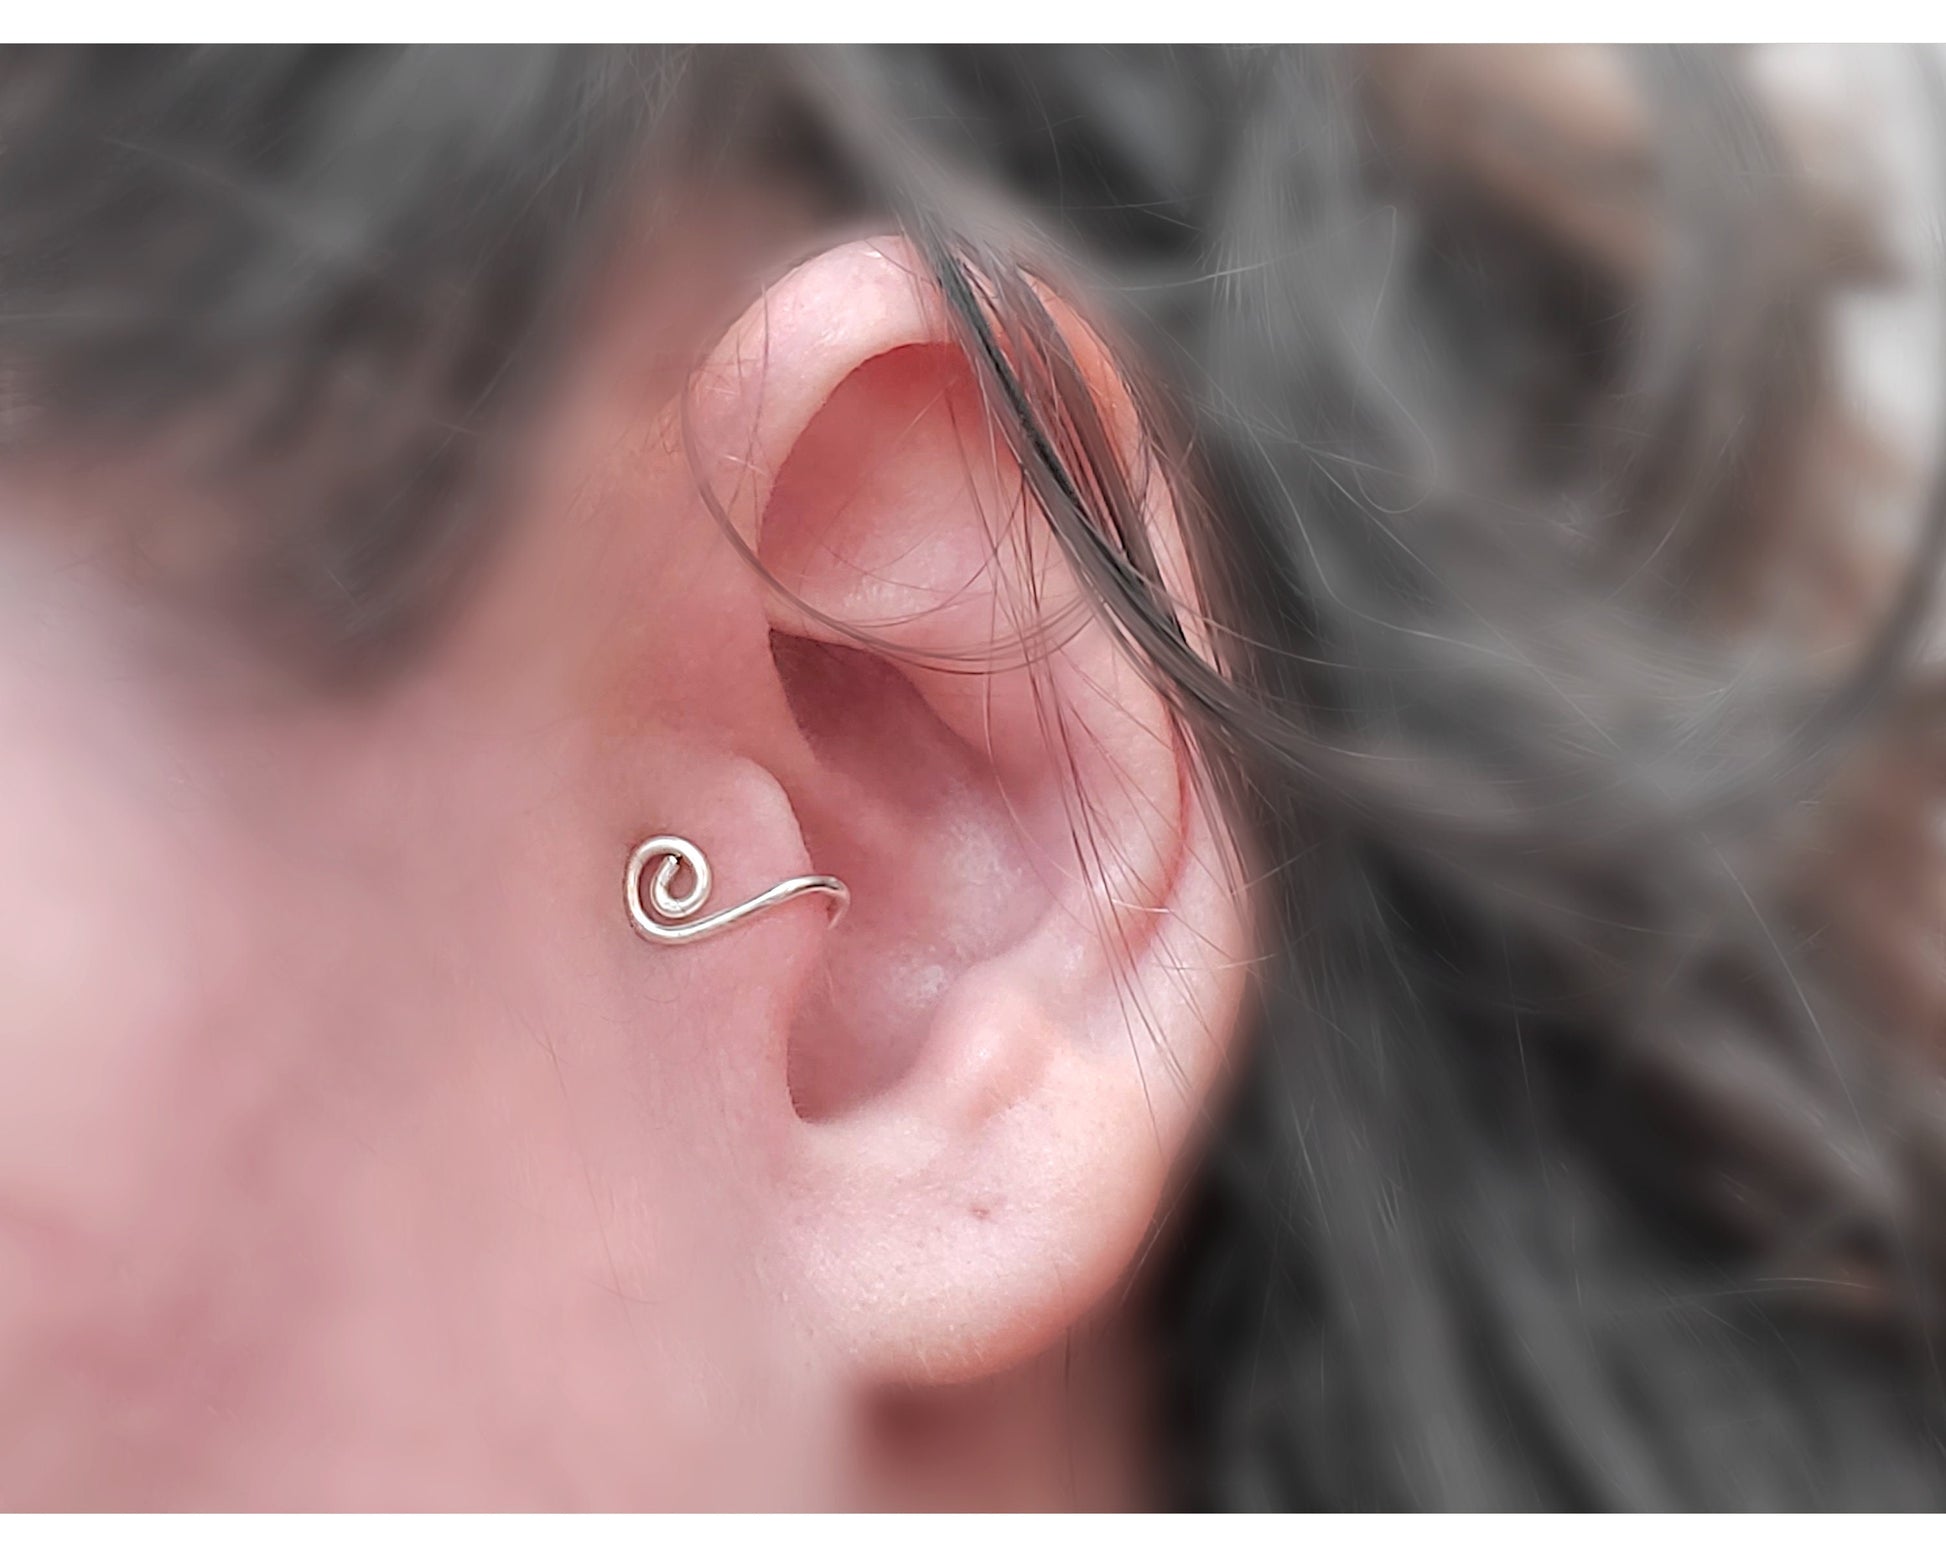 Ear Tragus /Nose Side Cuff, Double Spiral, Reversible, Adjustable, Simple, Minimalist, Unisex, Boho, Beach, Choice of Colors + Metals